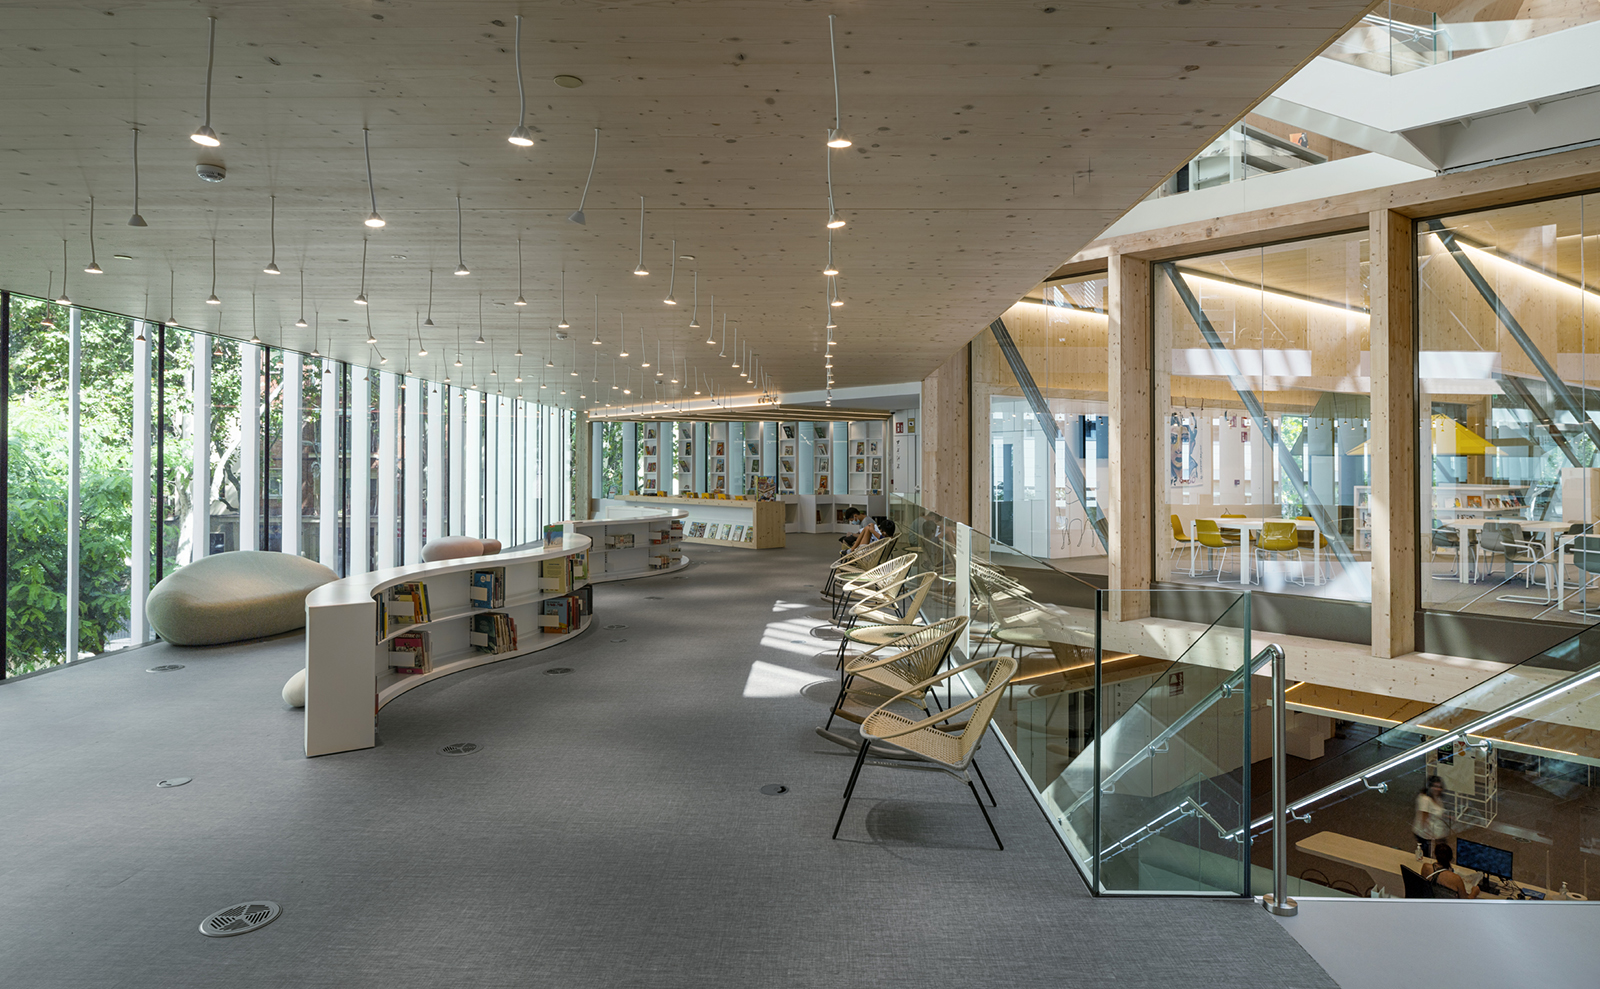 interior of library with lots of windows and curved bookshelves